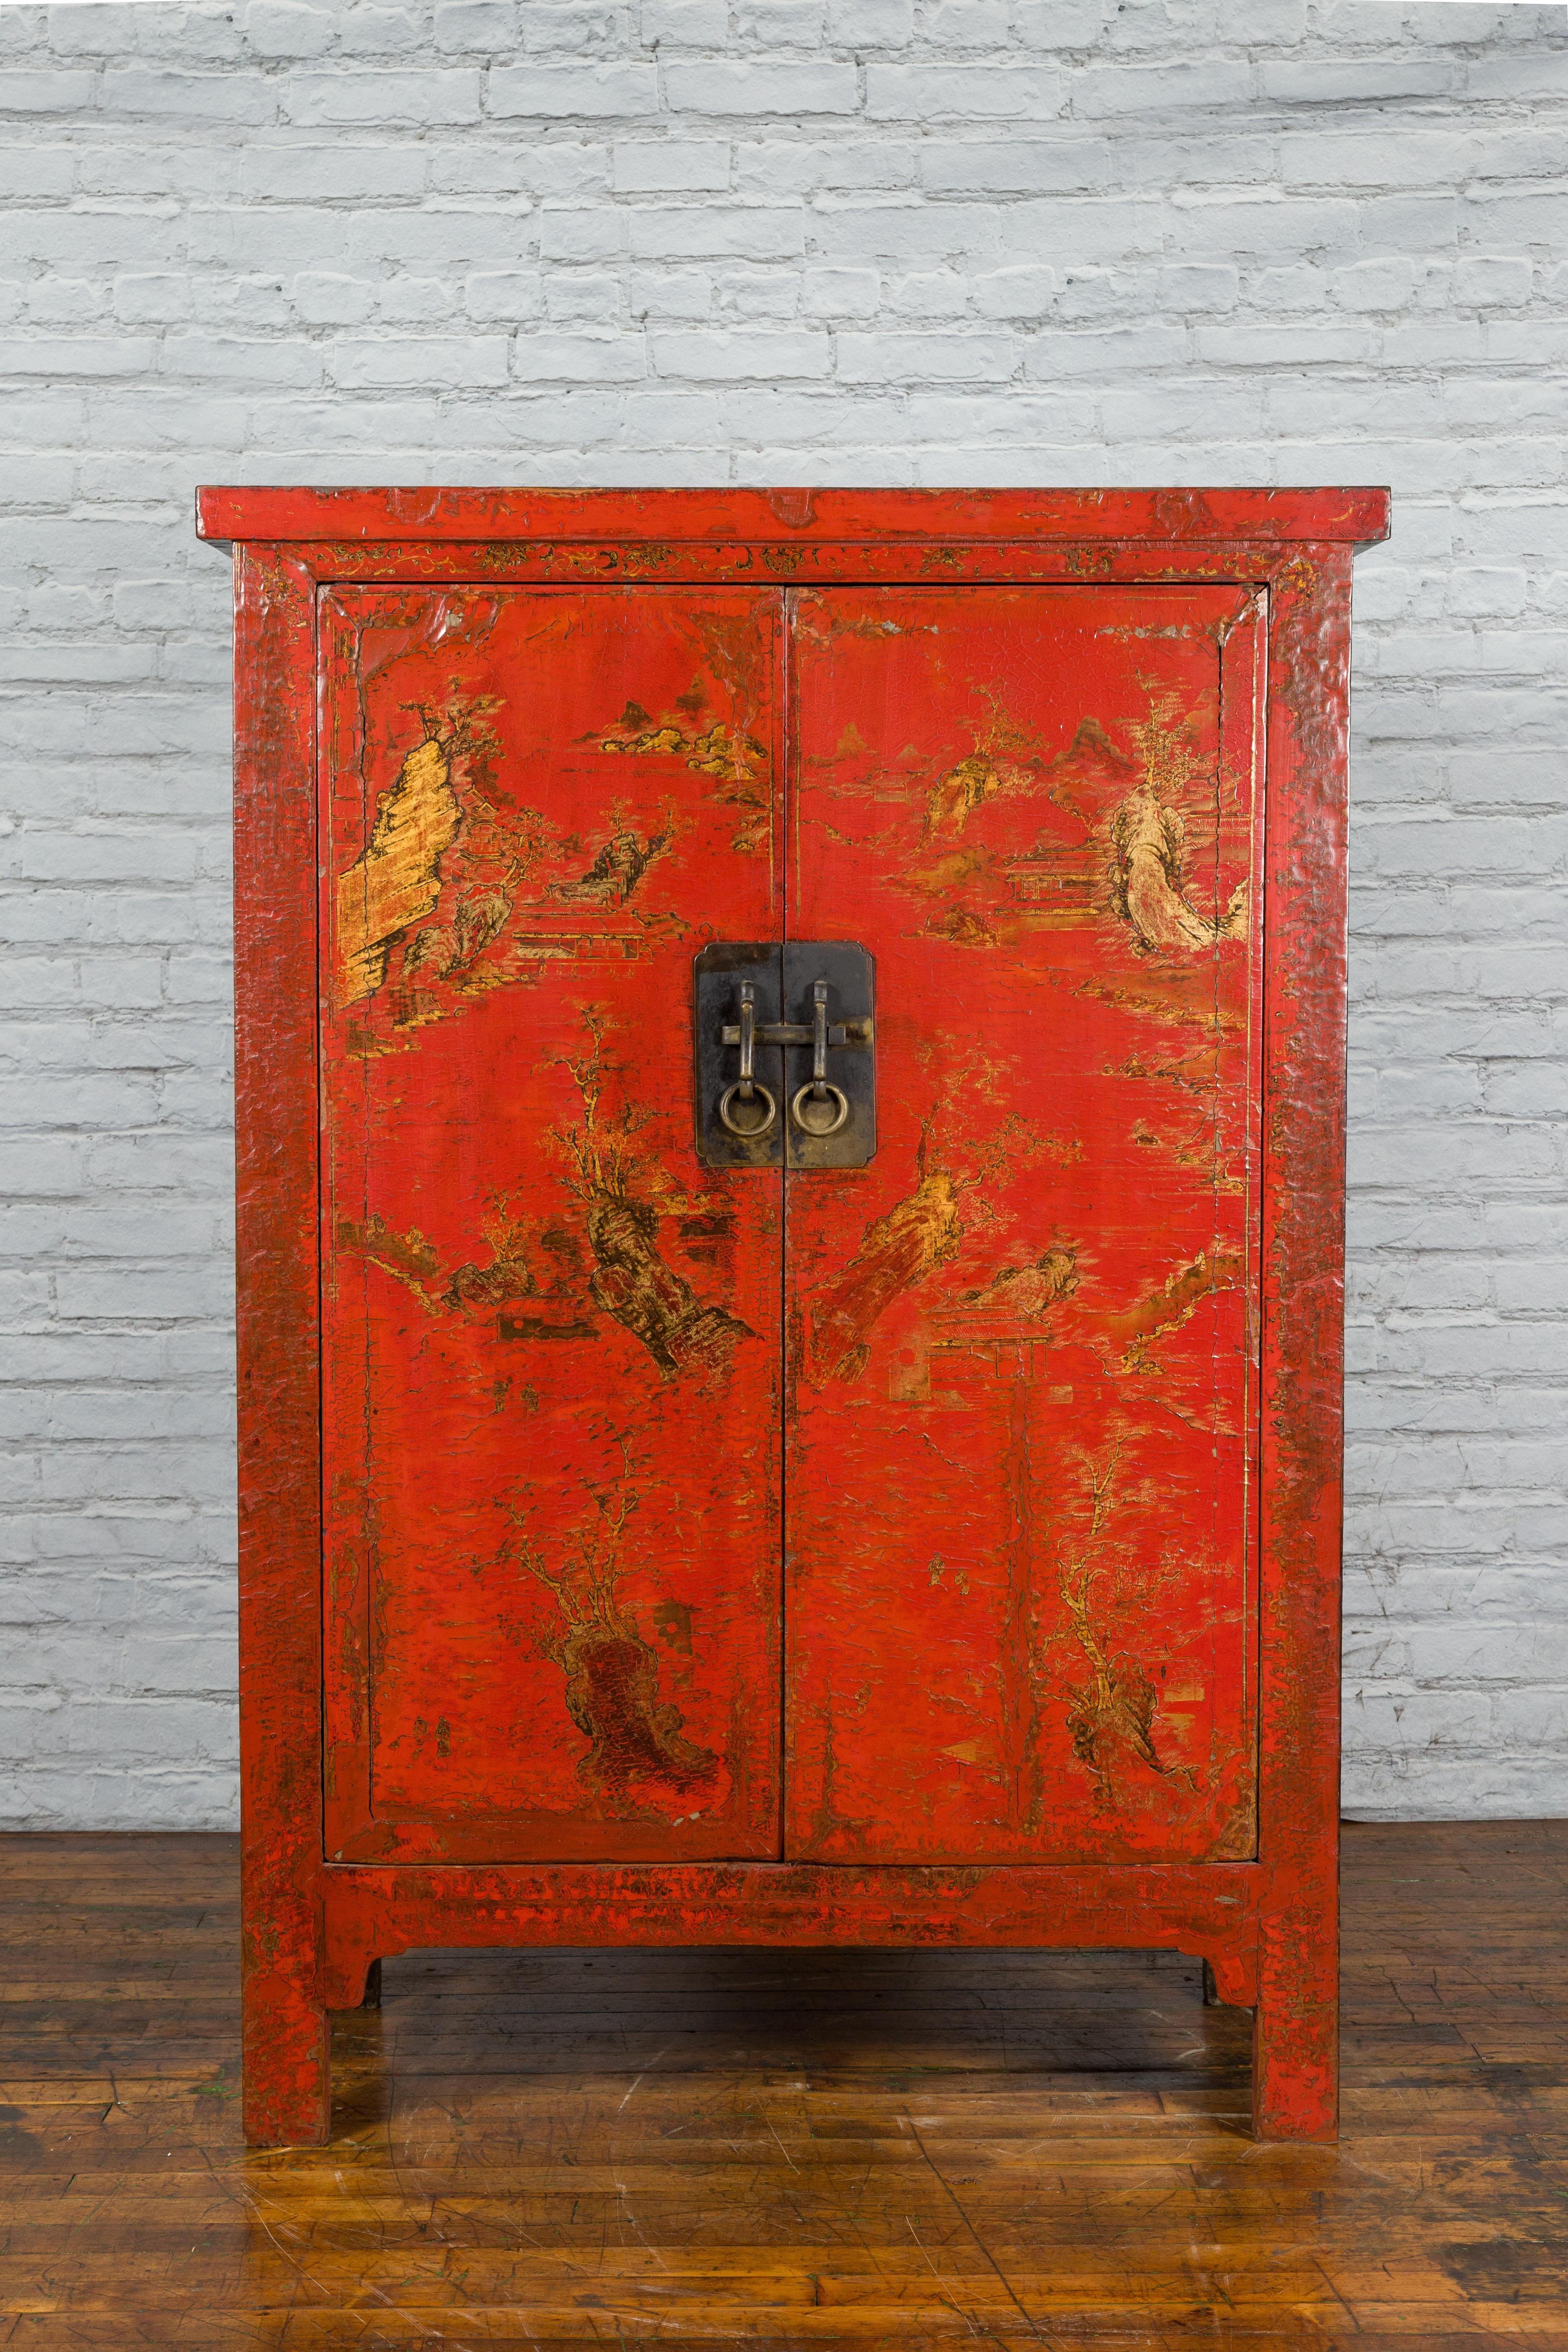 A Chinese Qing Dynasty period Shanxi cabinet from the 19th century with original red lacquer and hand-painted décor. Created in the North-Eastern province of Shanxi during the Qing dynasty, this 19th century cabinet features its original red lacquer